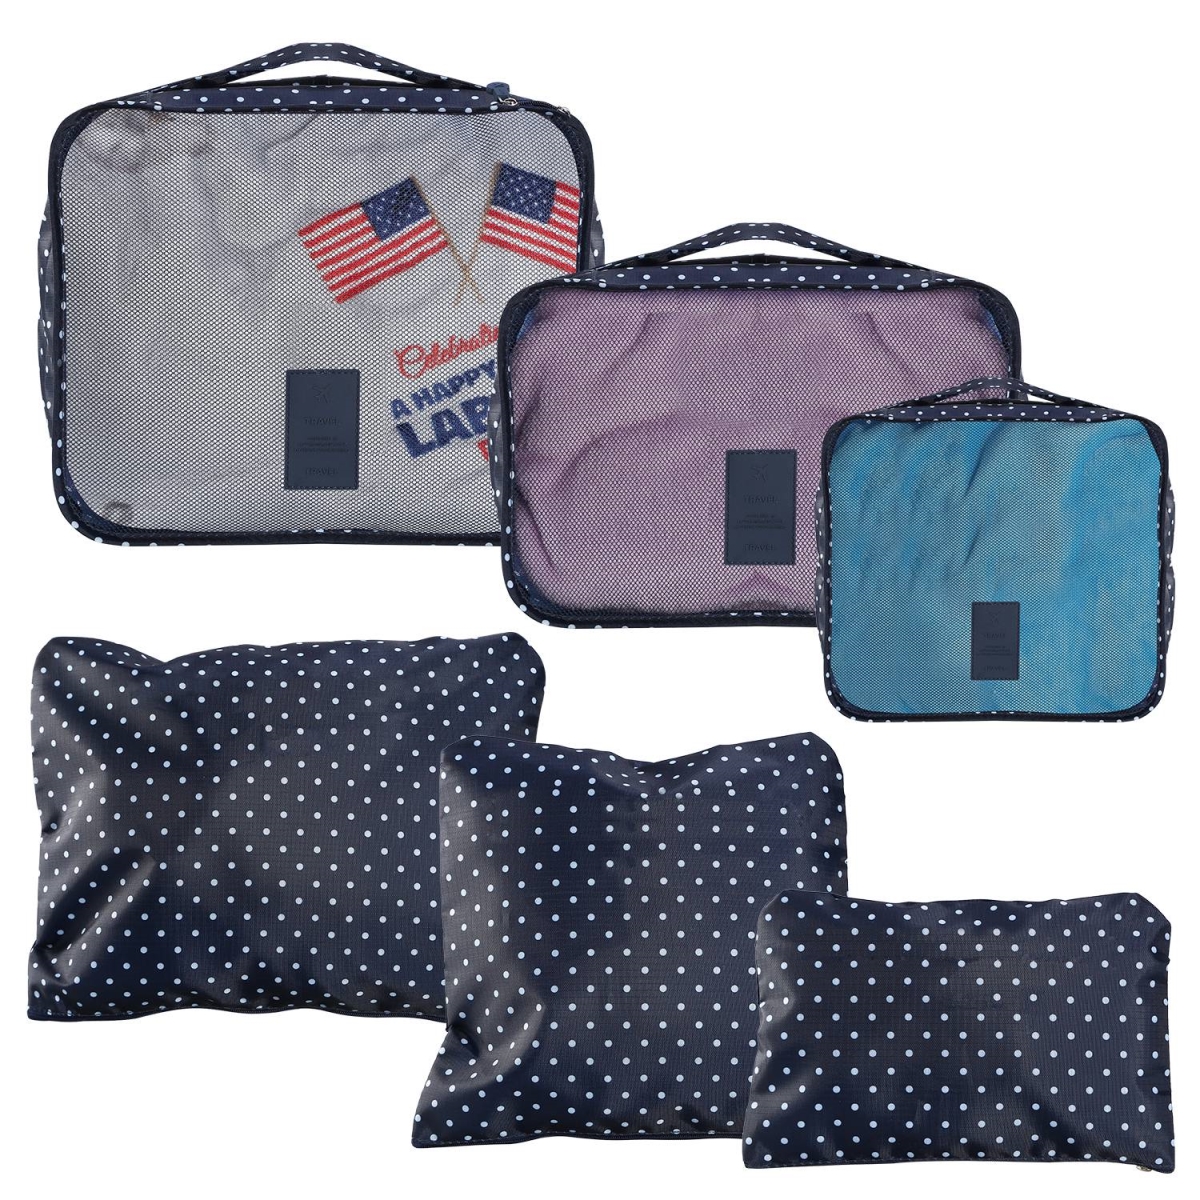 Fresh Fab Finds FFF-NavySpot-GPCT1234 Water-Resistant Travel Luggage Organizer Clothing Packing Cubes Clothes Storage Bags for Blouse Hosiery St